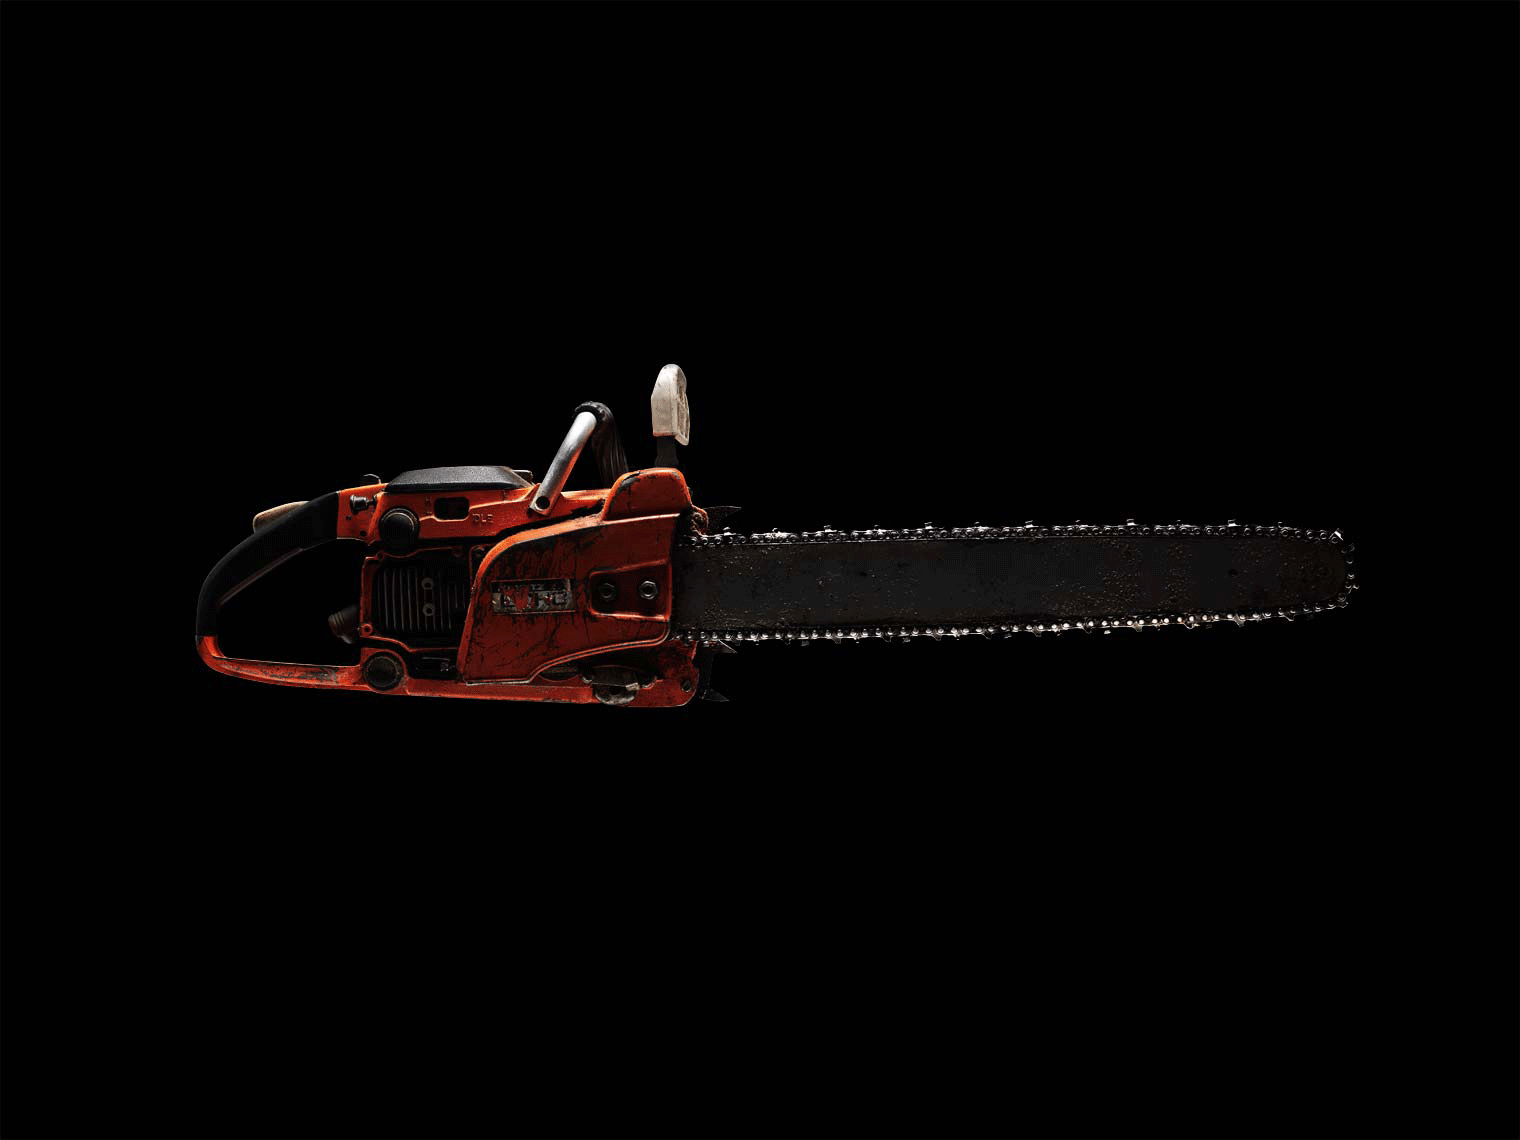 animation of a chainsaw on a black background